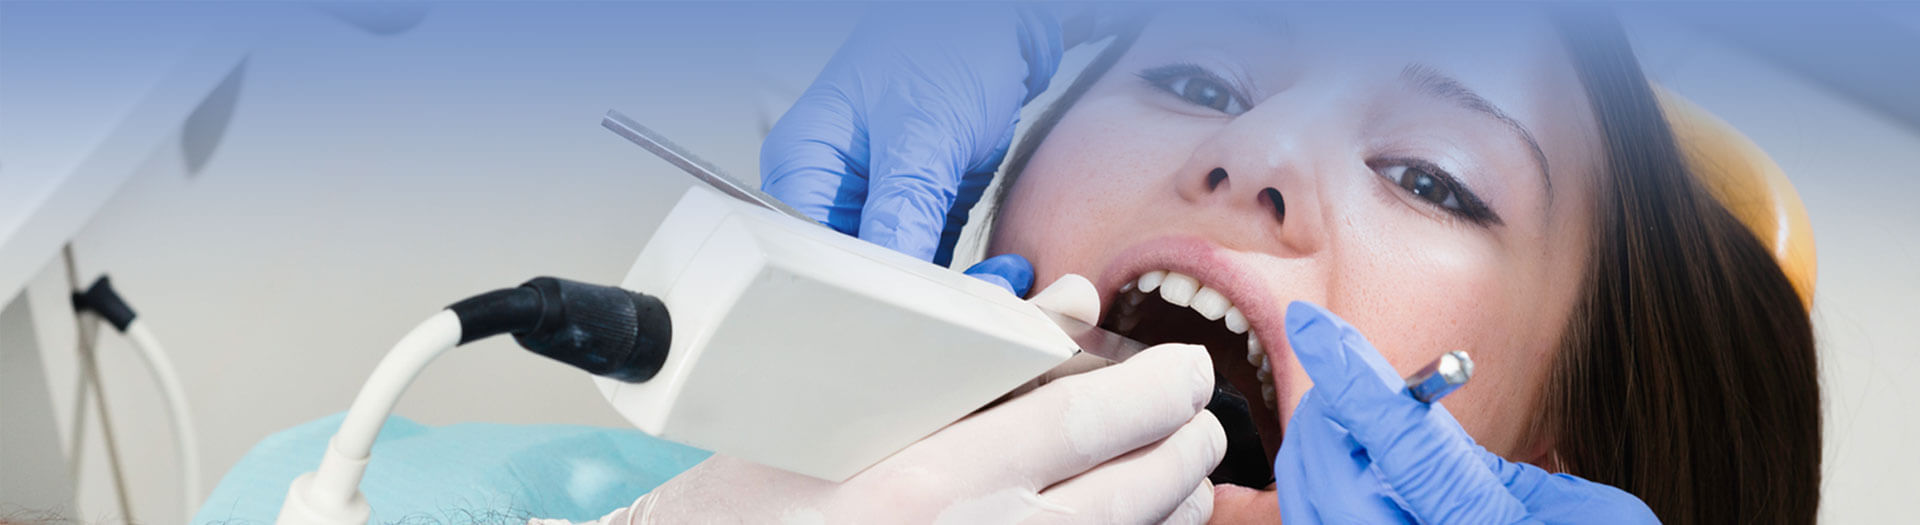 Female patient during Computer assisted tooth reconstruction